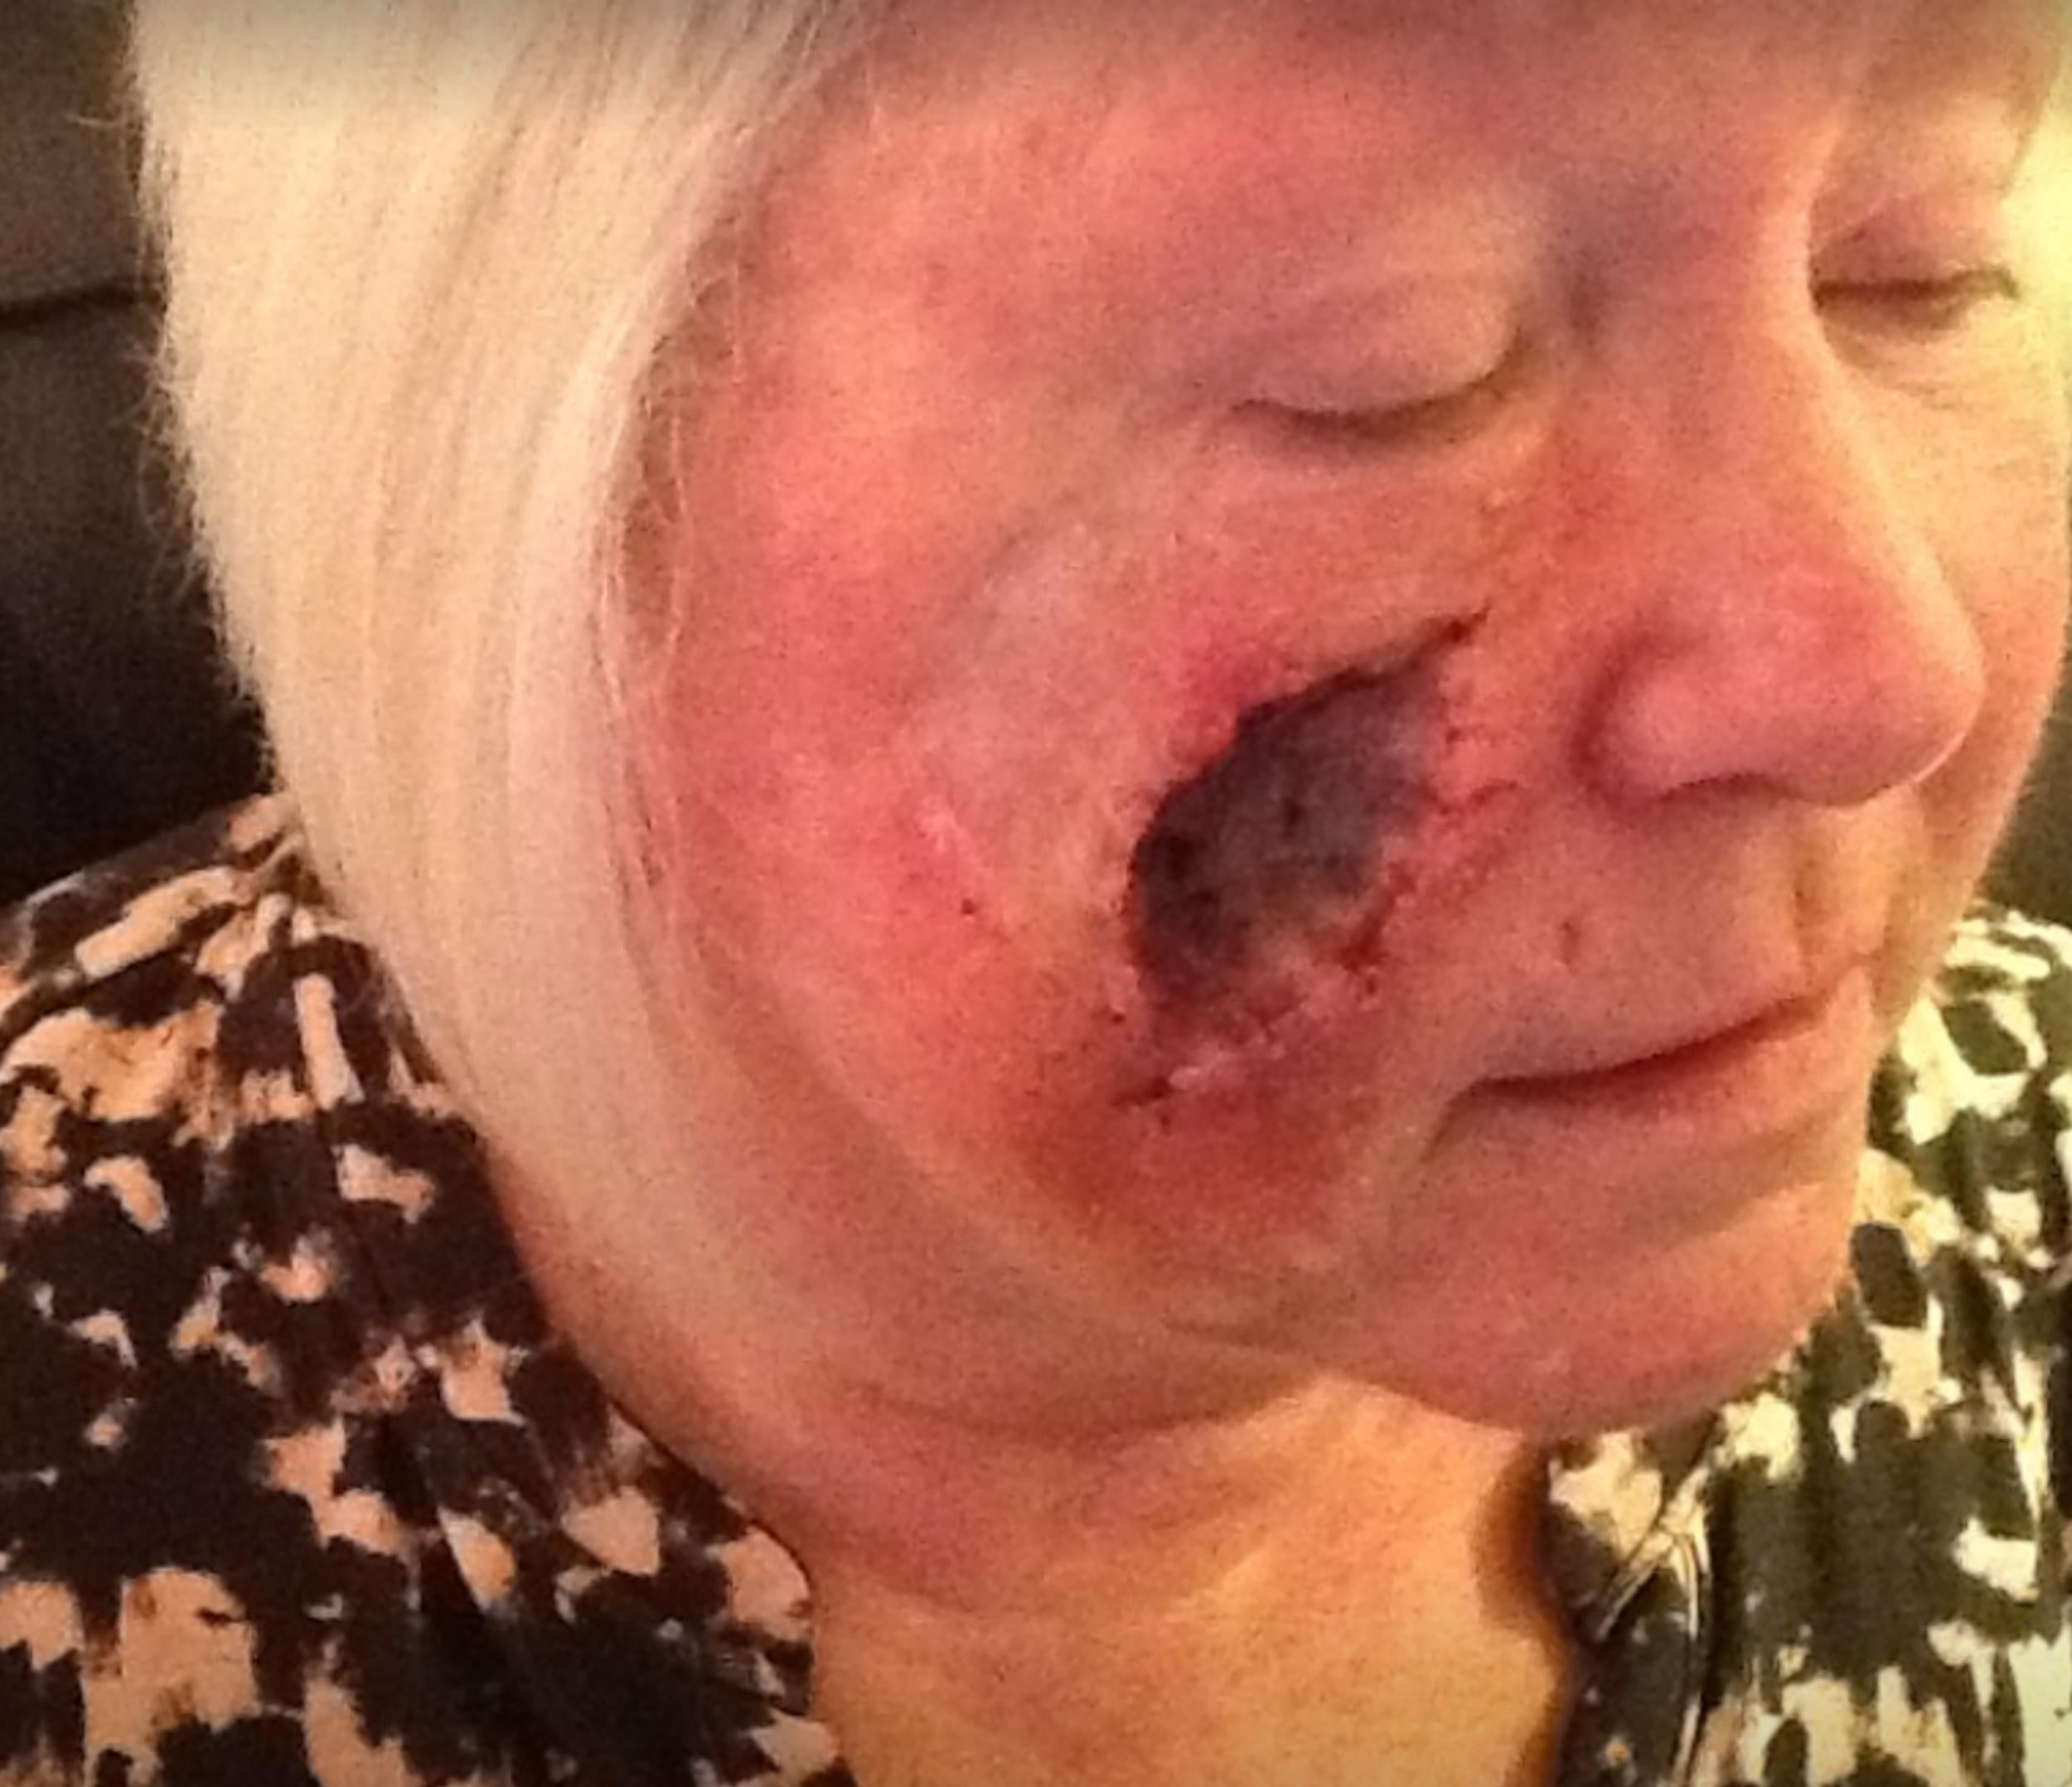 &#13;
This horrific image shows the effects of the multiple operations on Elaine's face (Mercury Press and Media)&#13;